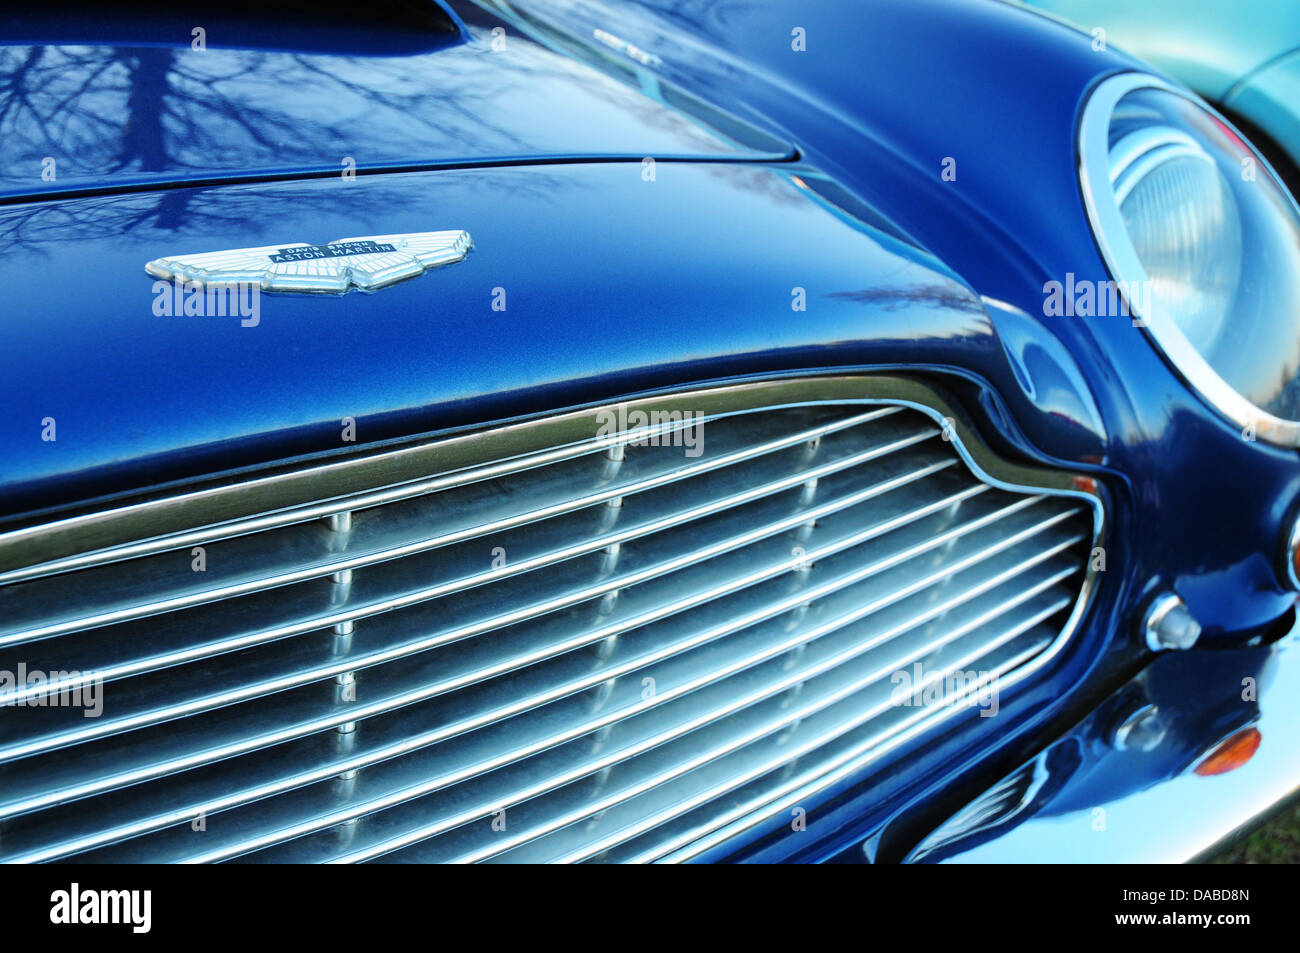 Aston Martin DB6 sports car grille in blue Stock Photo